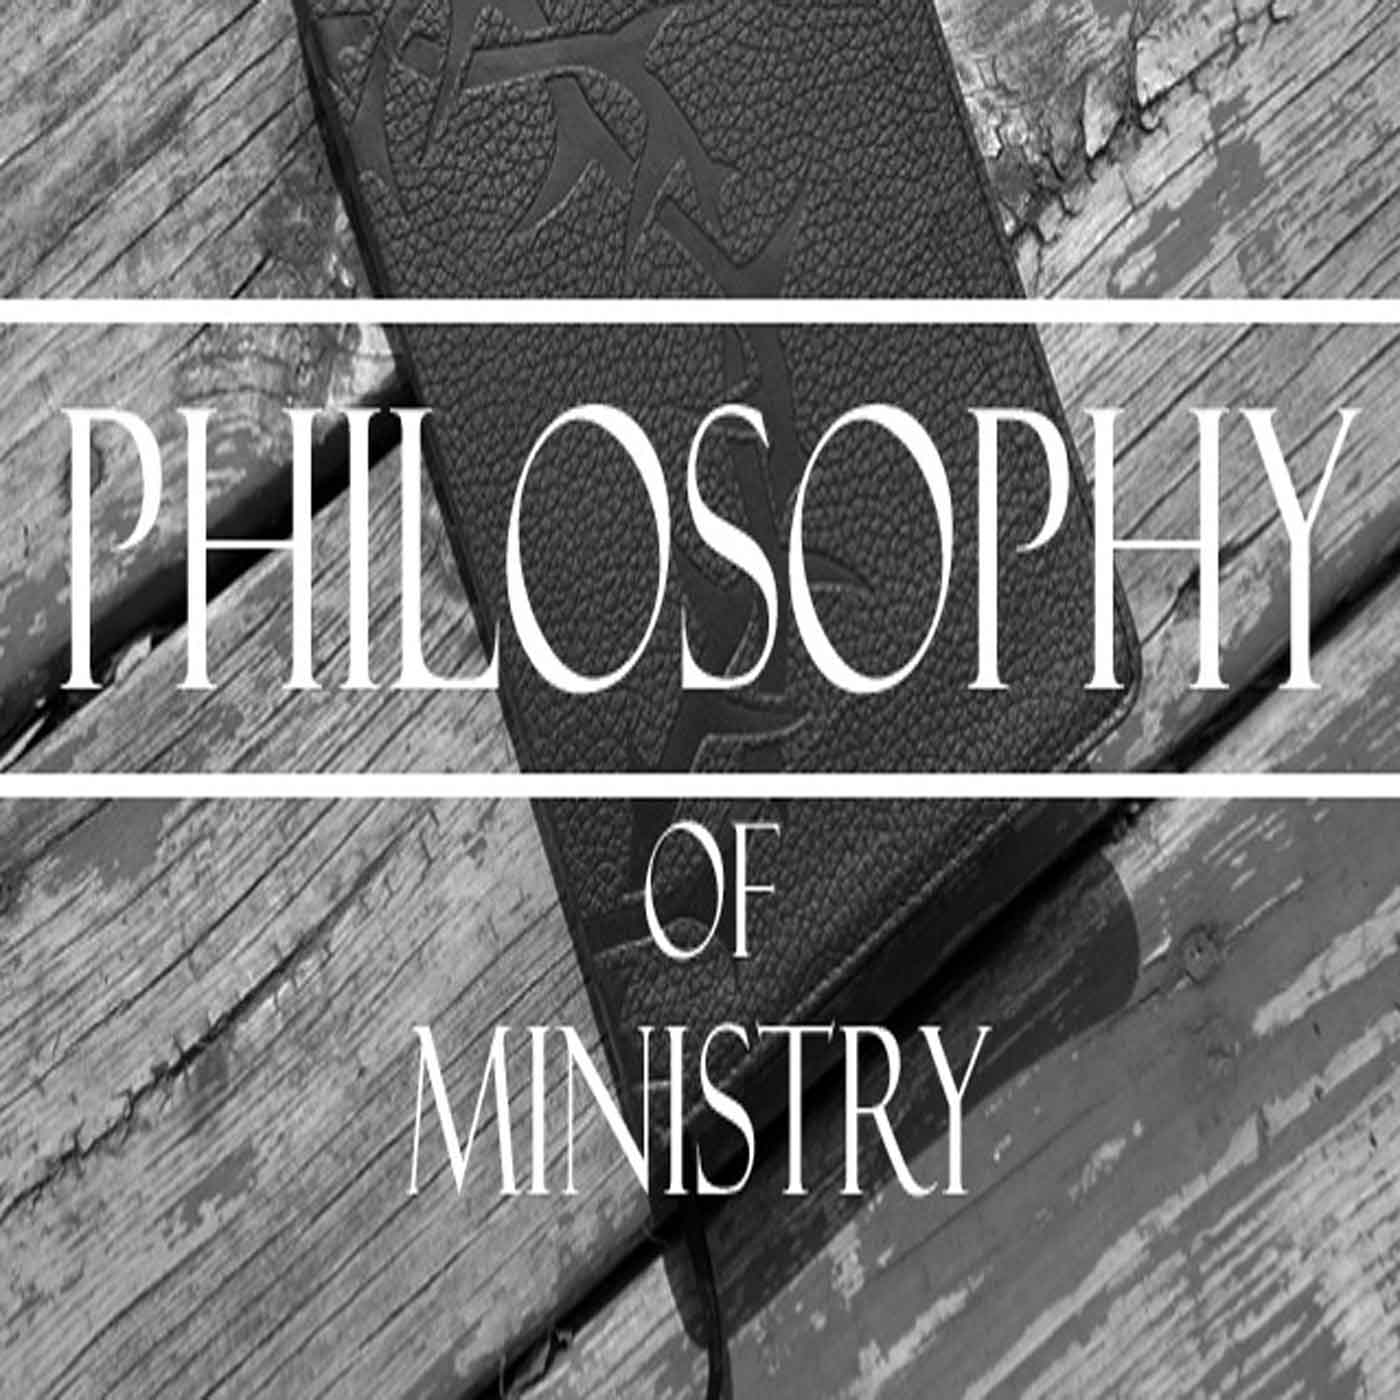 The Philosophy of Ministry